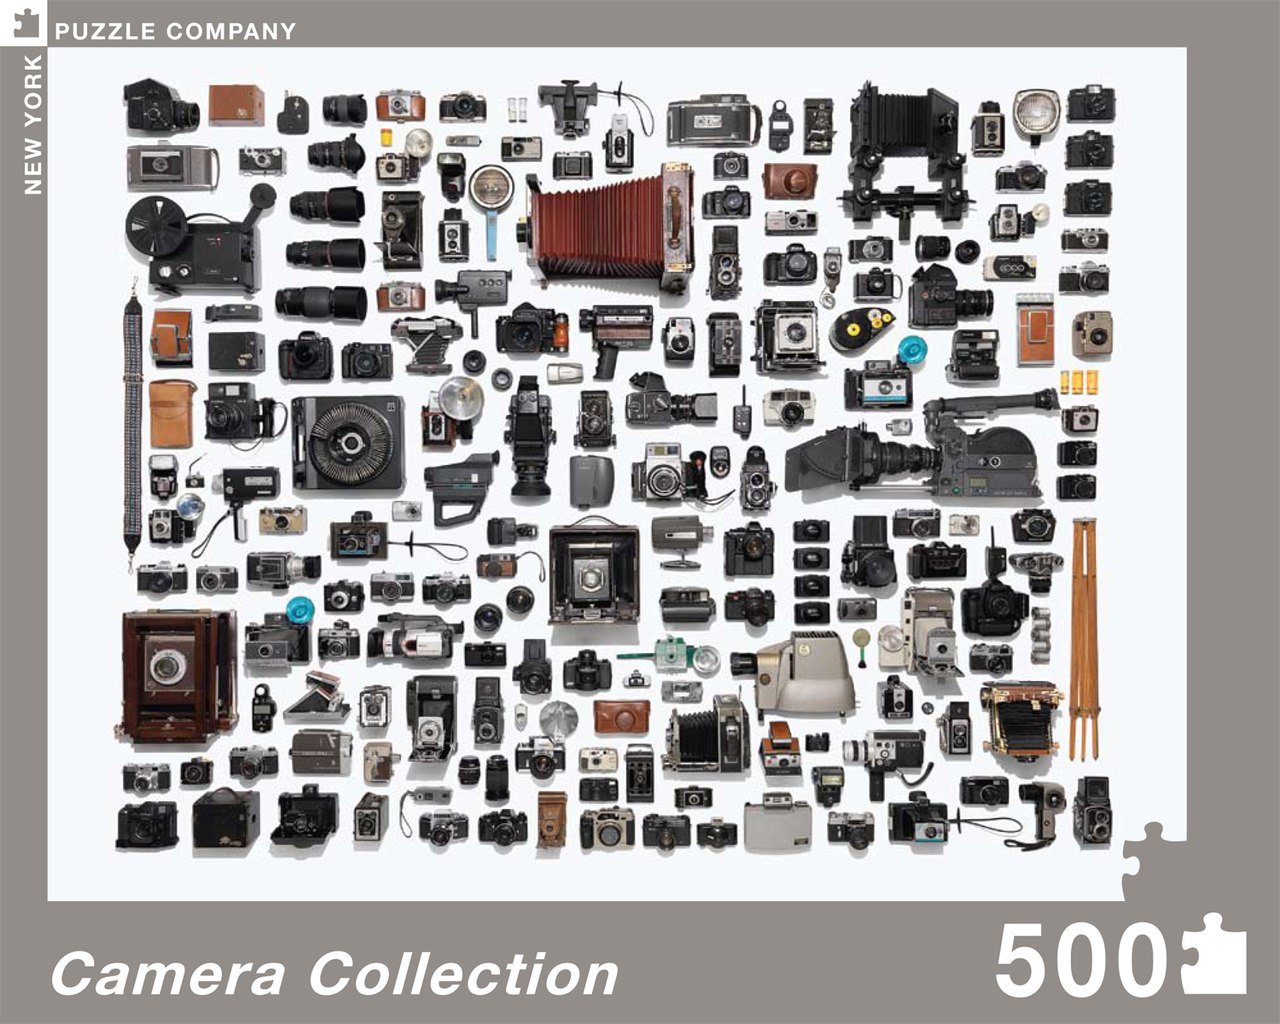 Camera Collection - 500pc Jigsaw Puzzle by New York Puzzle Company